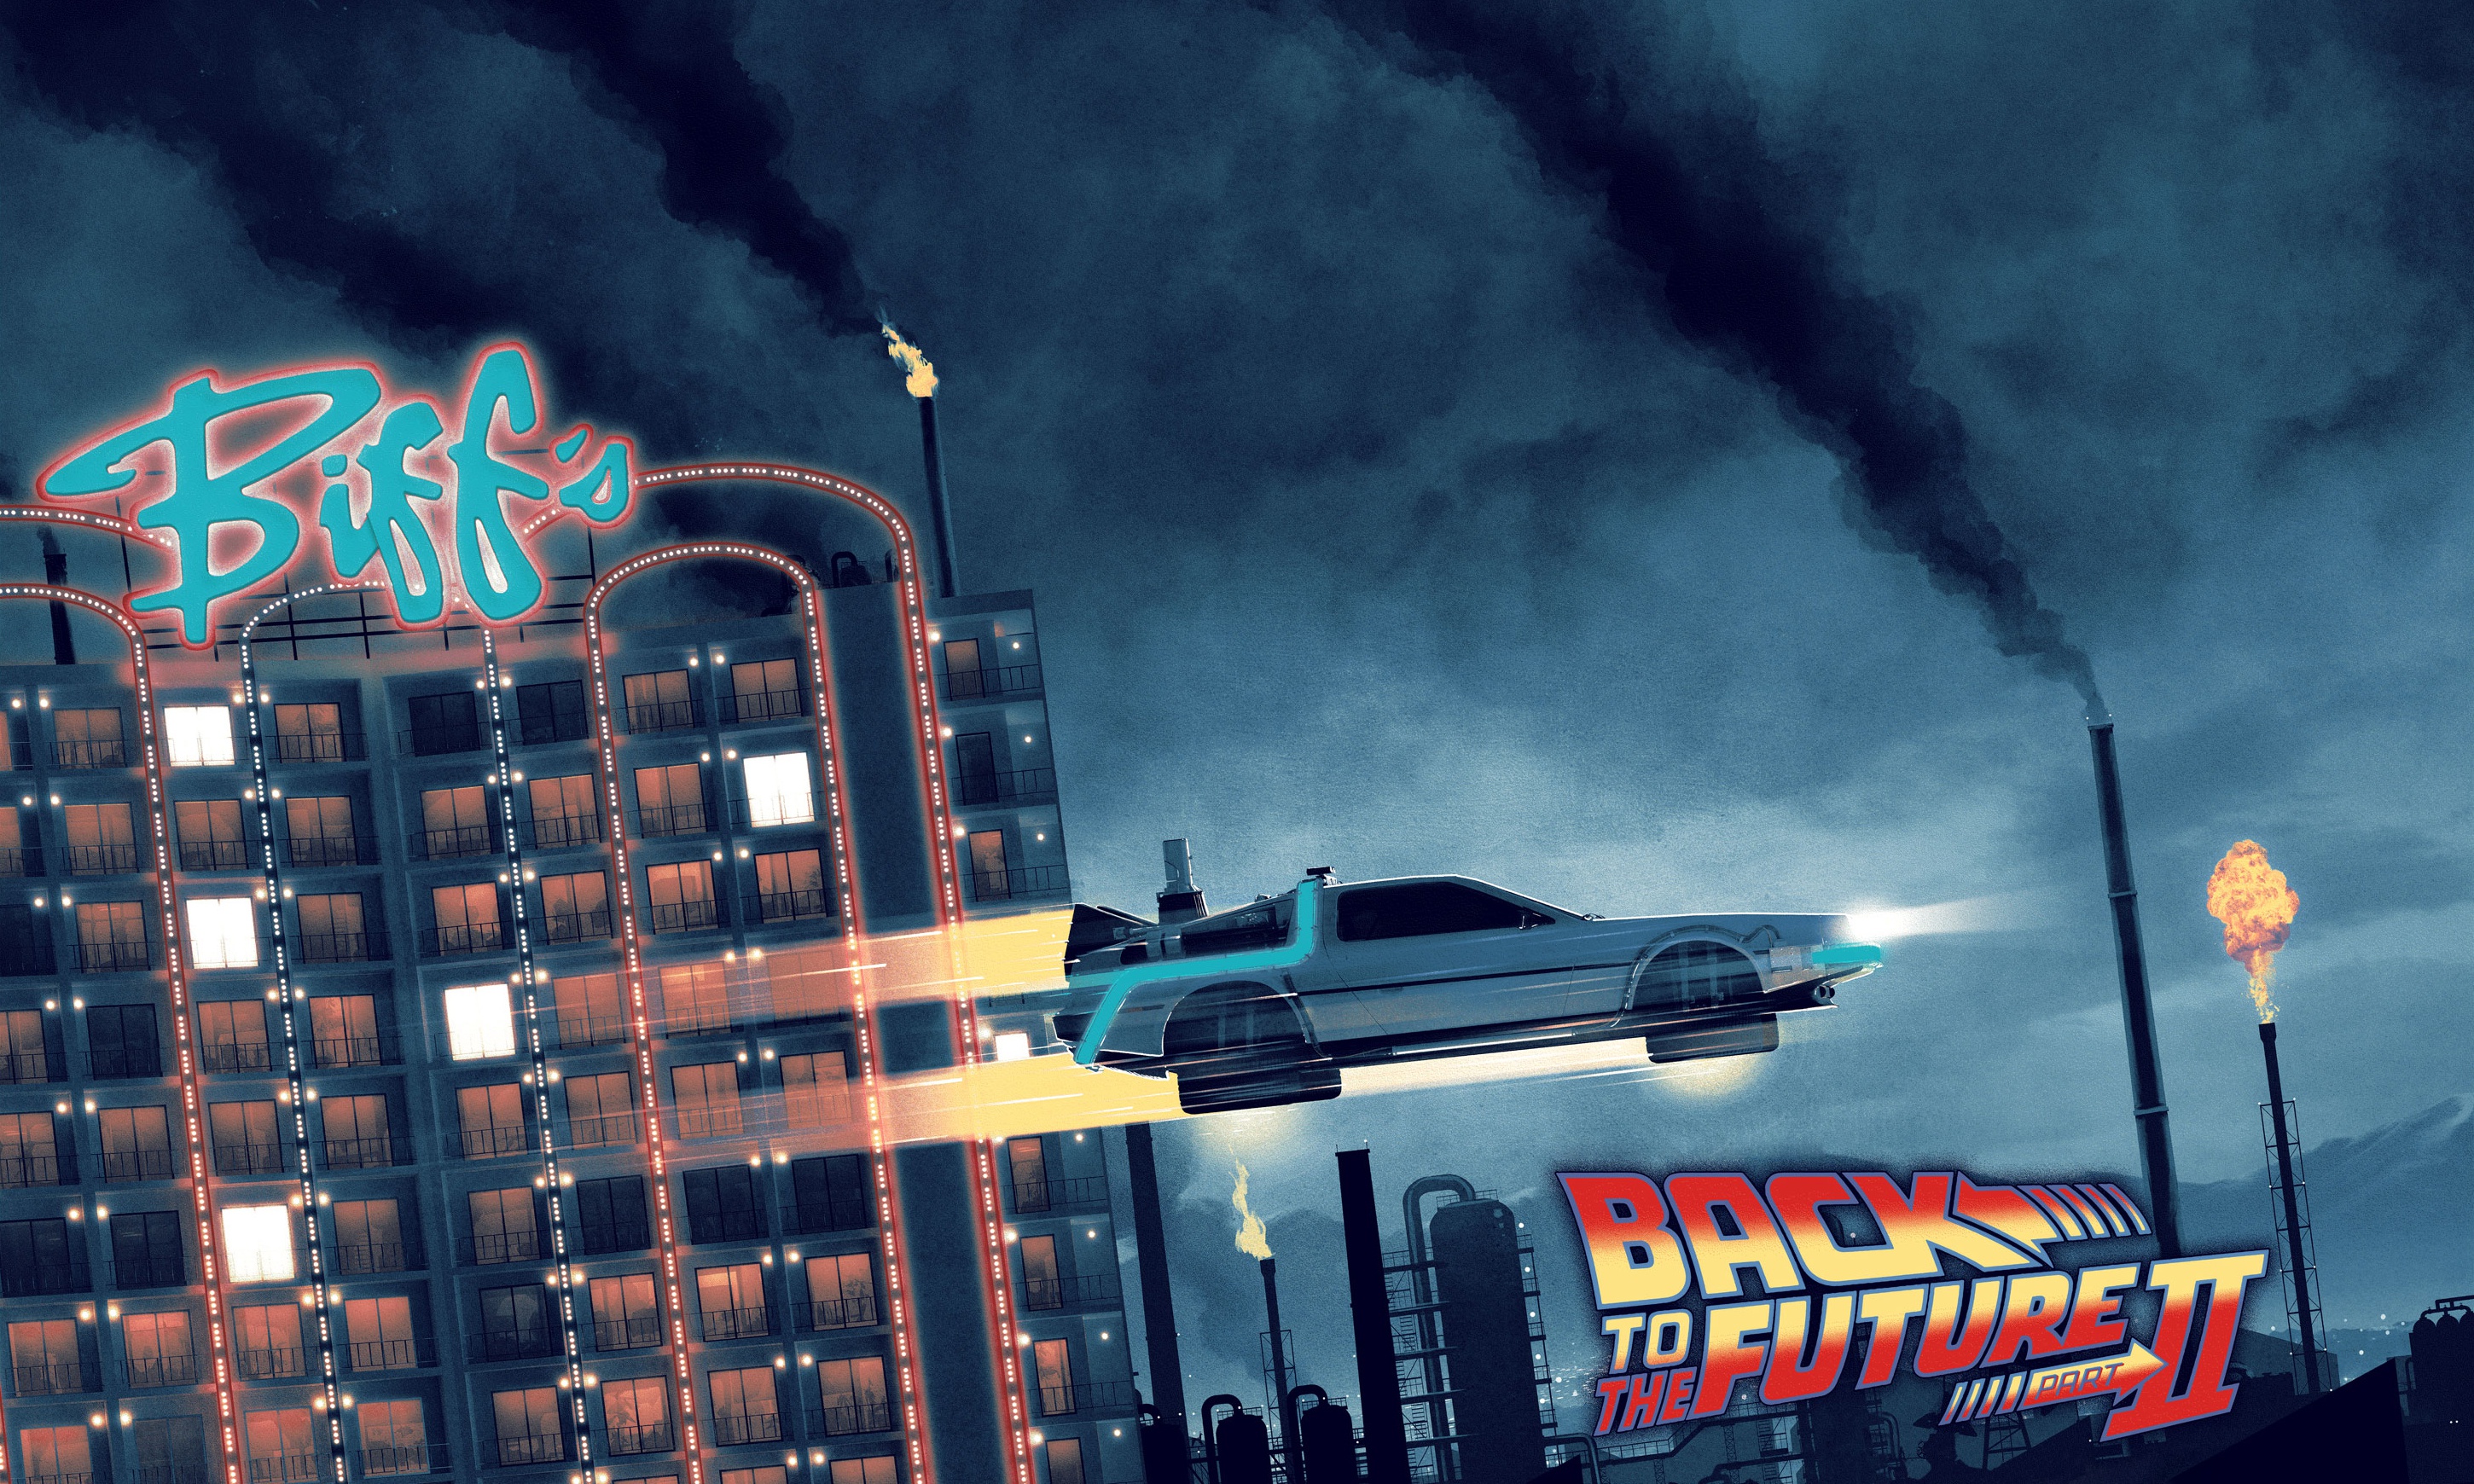 General 2900x1740 1989 (year) movies Time Machine car vehicle Back to the Future II (Movies) artwork